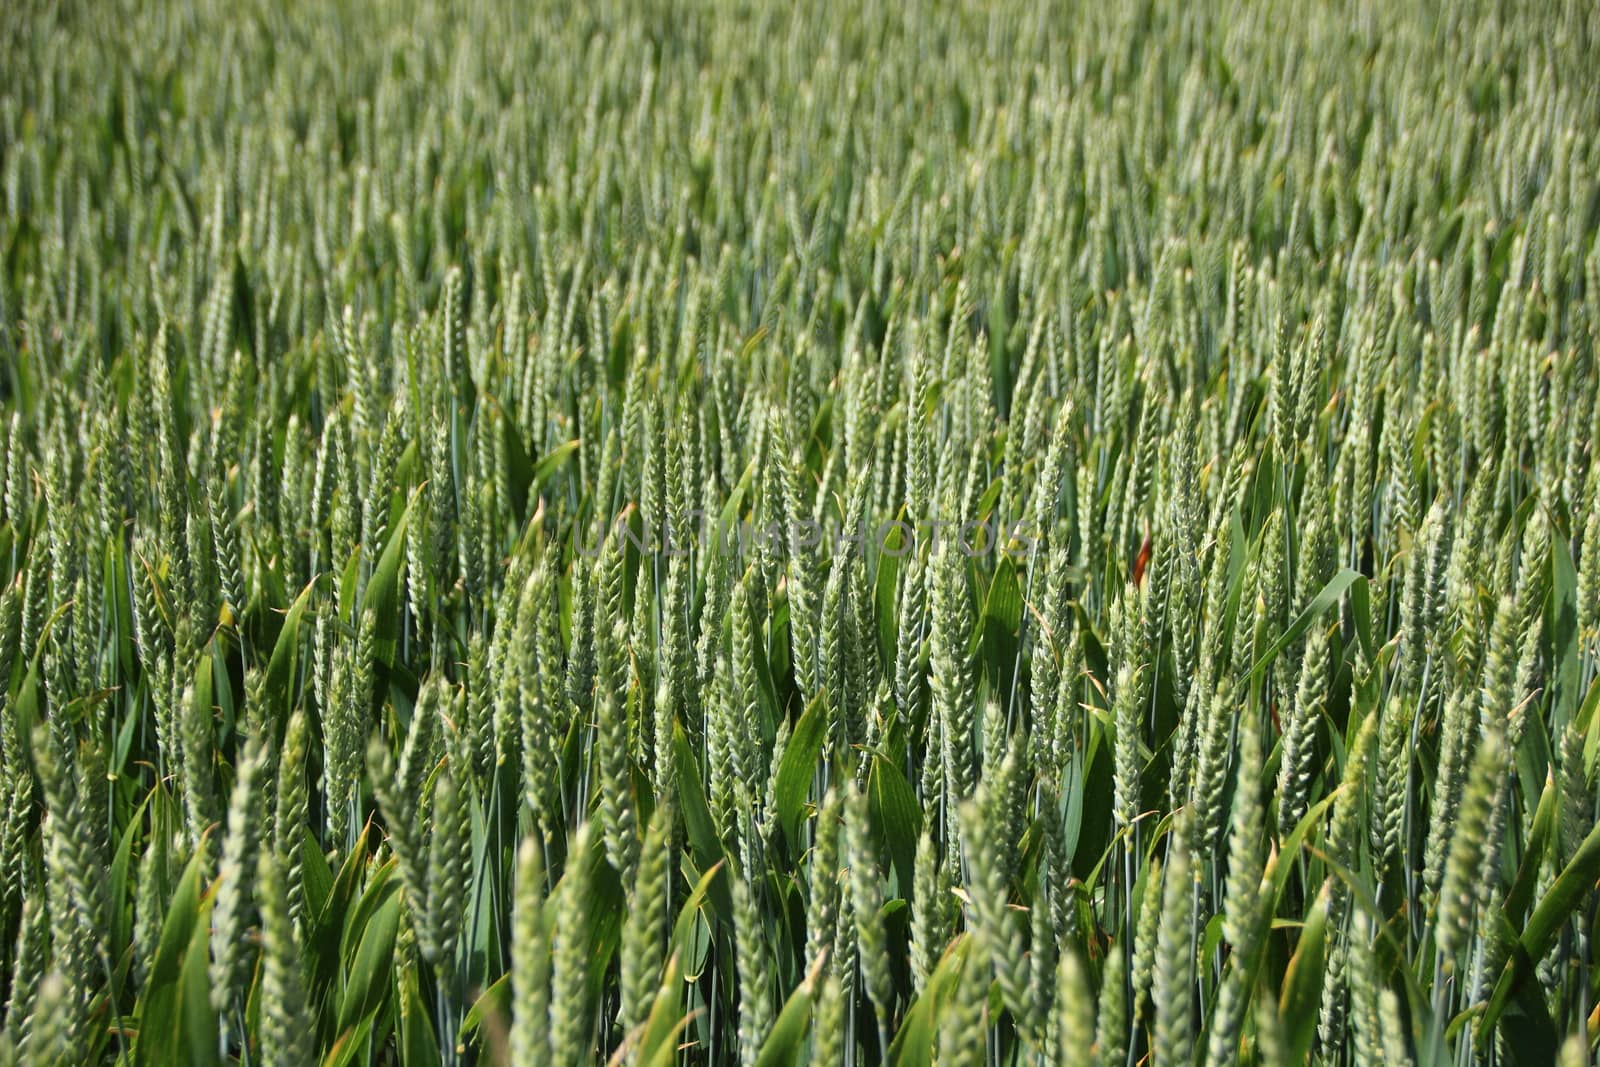 Perspective of Green Wheat Crop Field at Spring Time